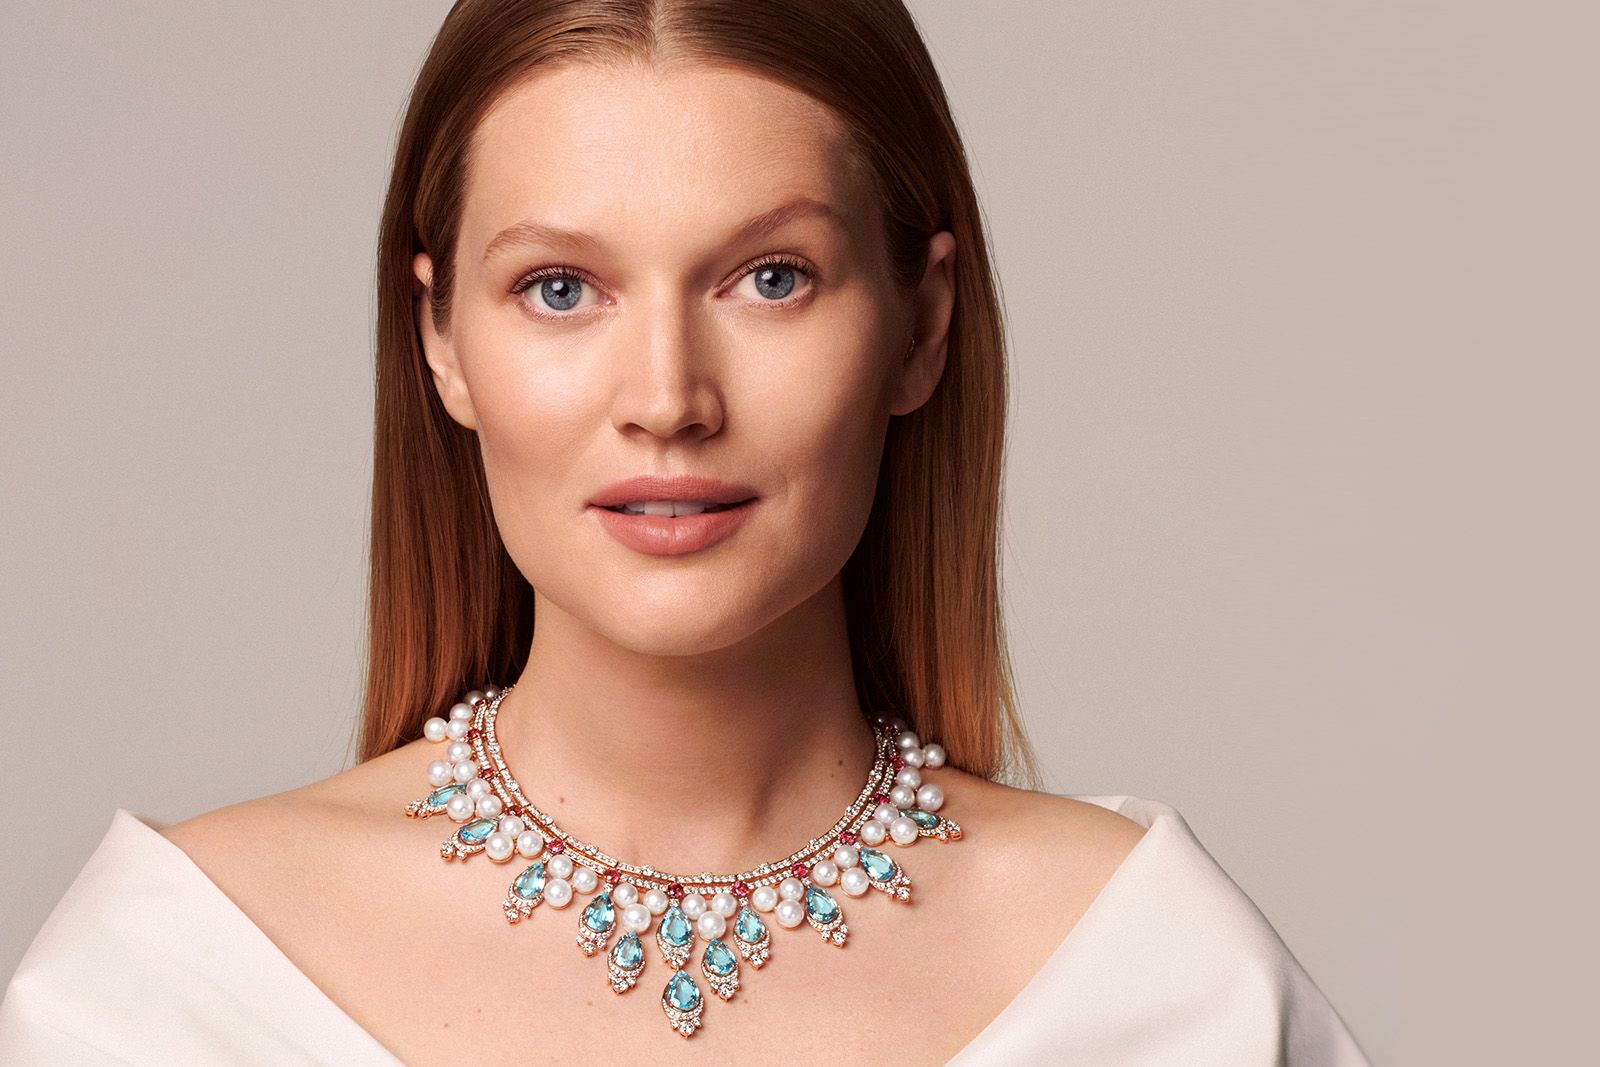 The Magnifica High Jewelry collection